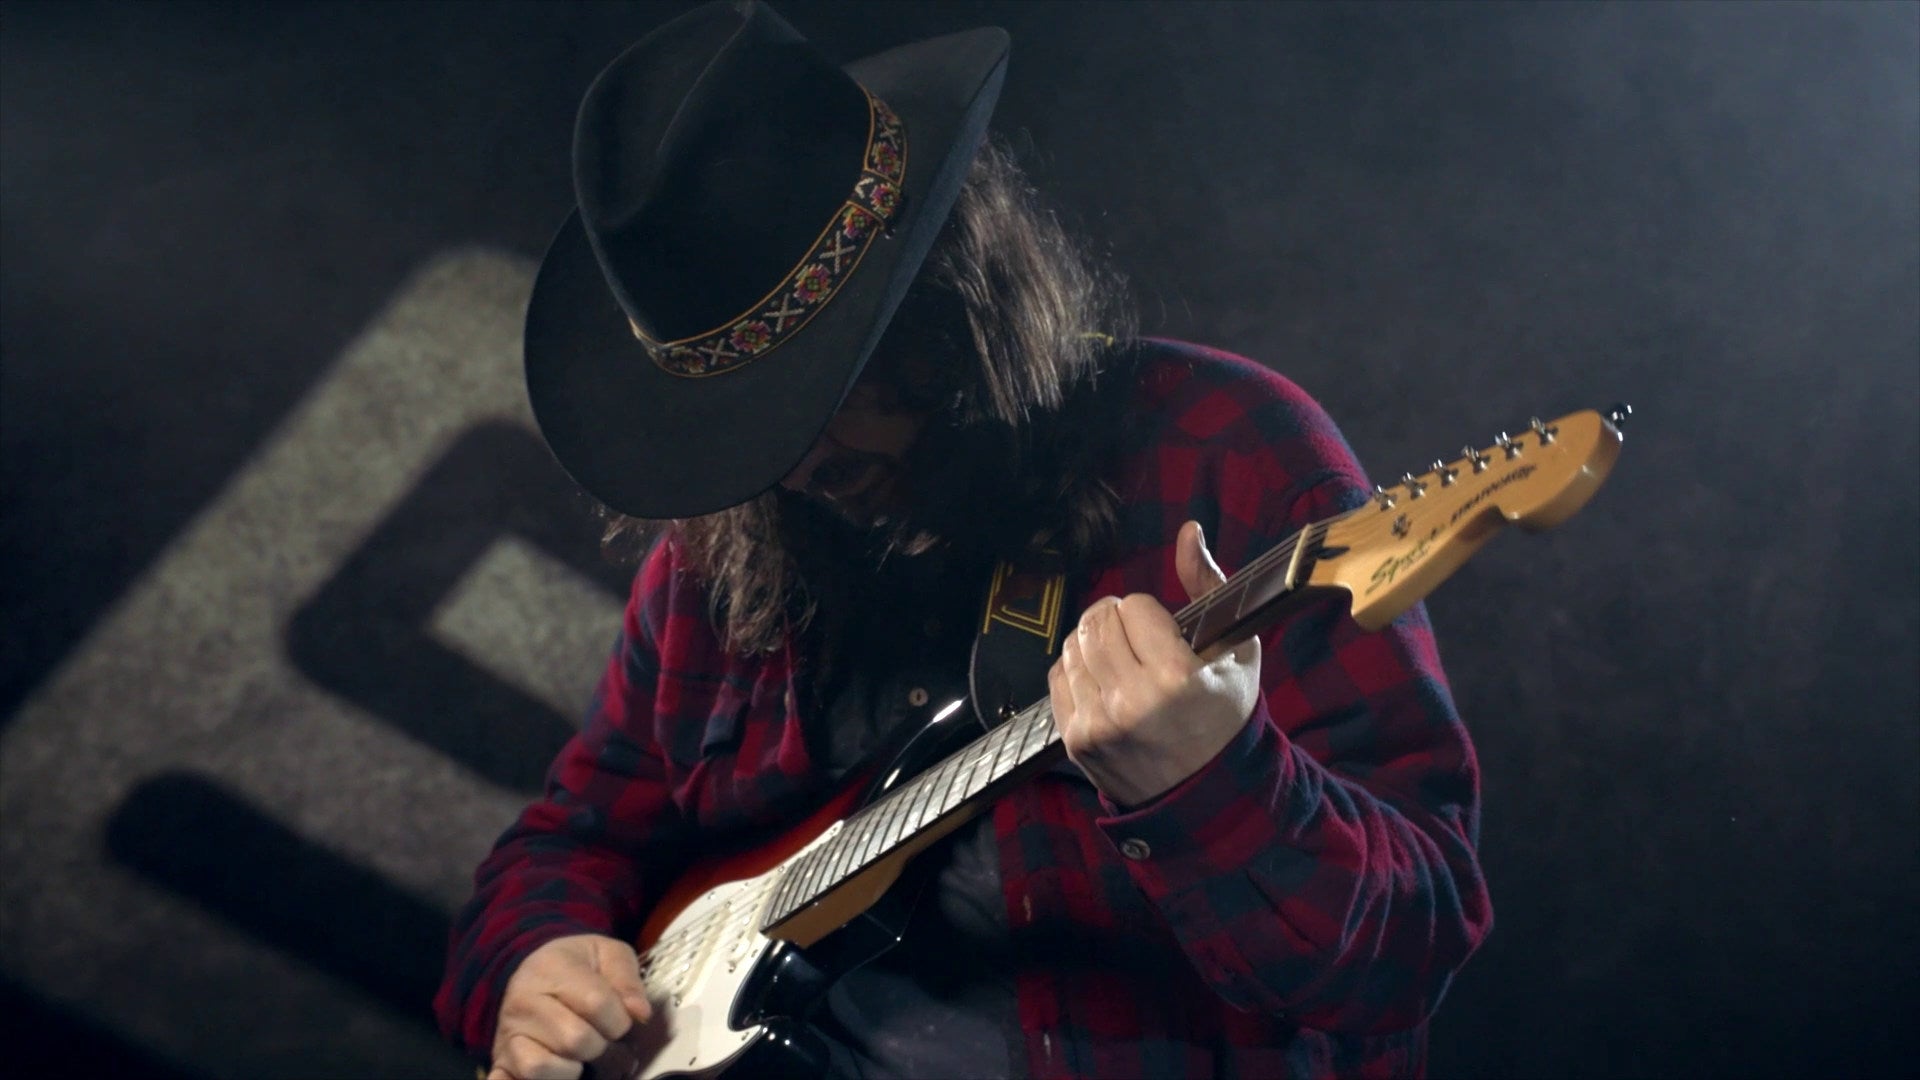 A man in a cowboy hat and flannel shirt plays electric guitar in a Farming Simulator 19 DLC trailer.